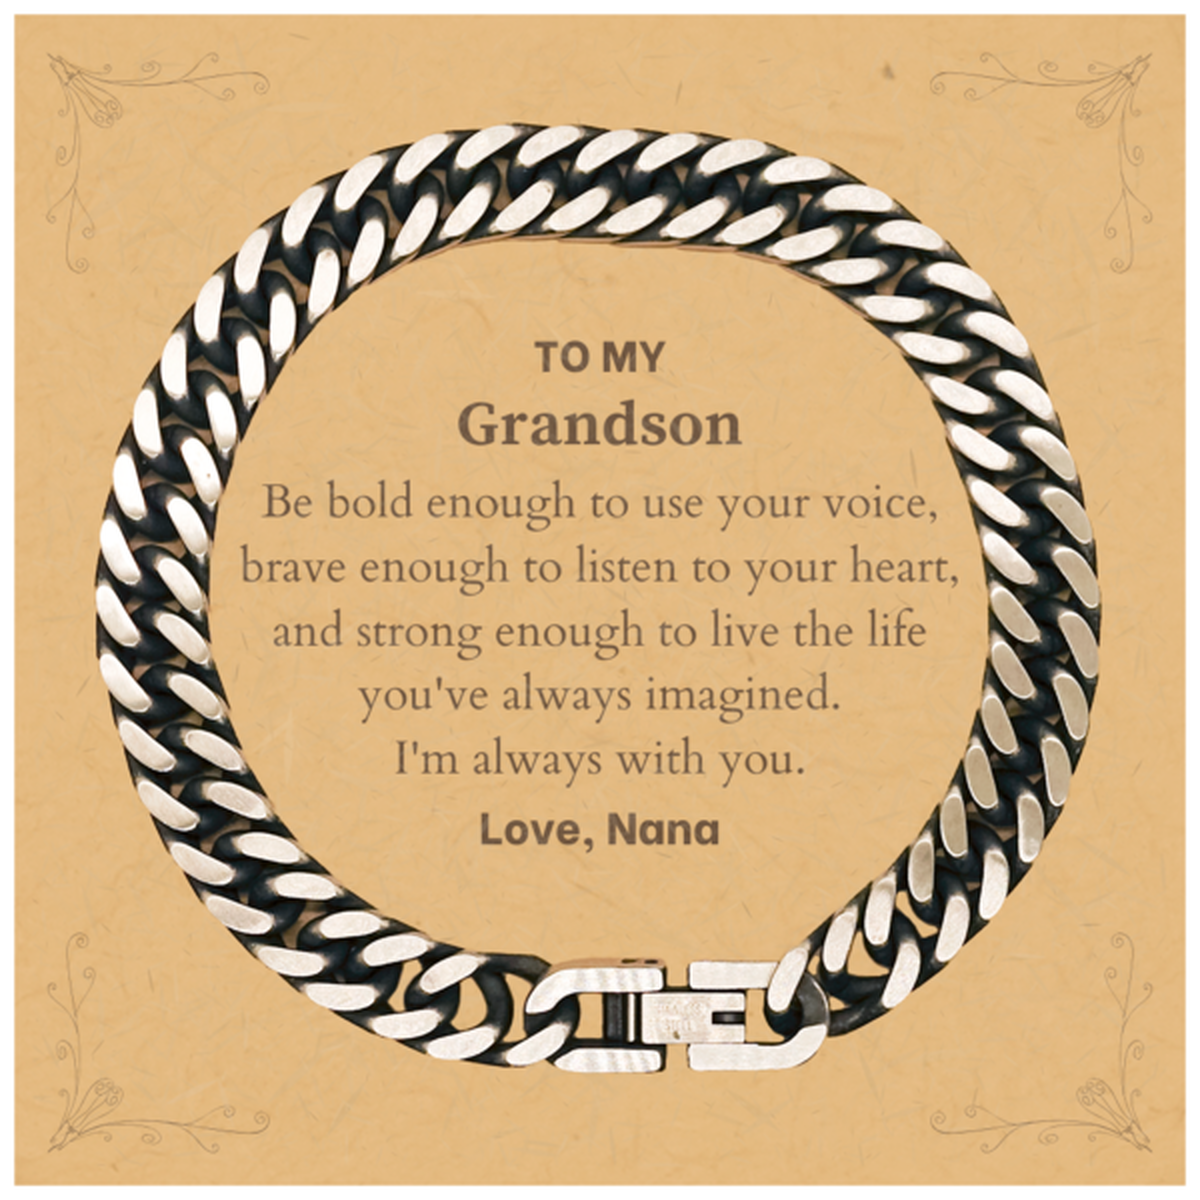 Keepsake Grandson Cuban Link Chain Bracelet Gift Idea Graduation Christmas Birthday Grandson from Nana, Grandson Be bold enough to use your voice, brave enough to listen to your heart. Love, Nana